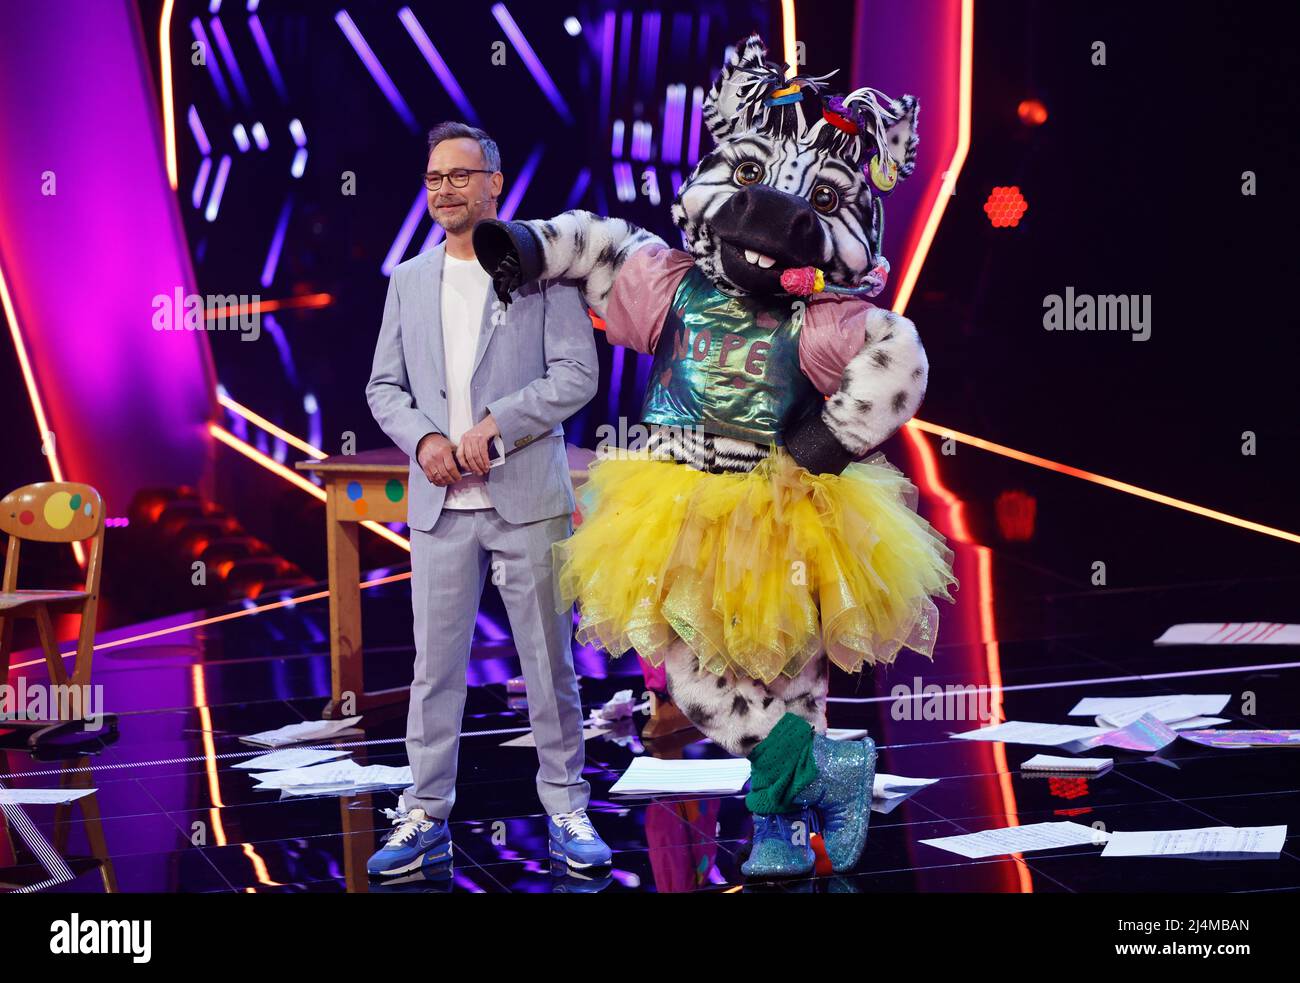 Cologne, Germany. 16th Apr, 2022. The character "The Zebra" is on stage in the  ProSieben show "The Masked Singer" alongside host Matthias Opdenhövel.  Credit: Thomas Banneyer/dpa/Alamy Live News Stock Photo - Alamy